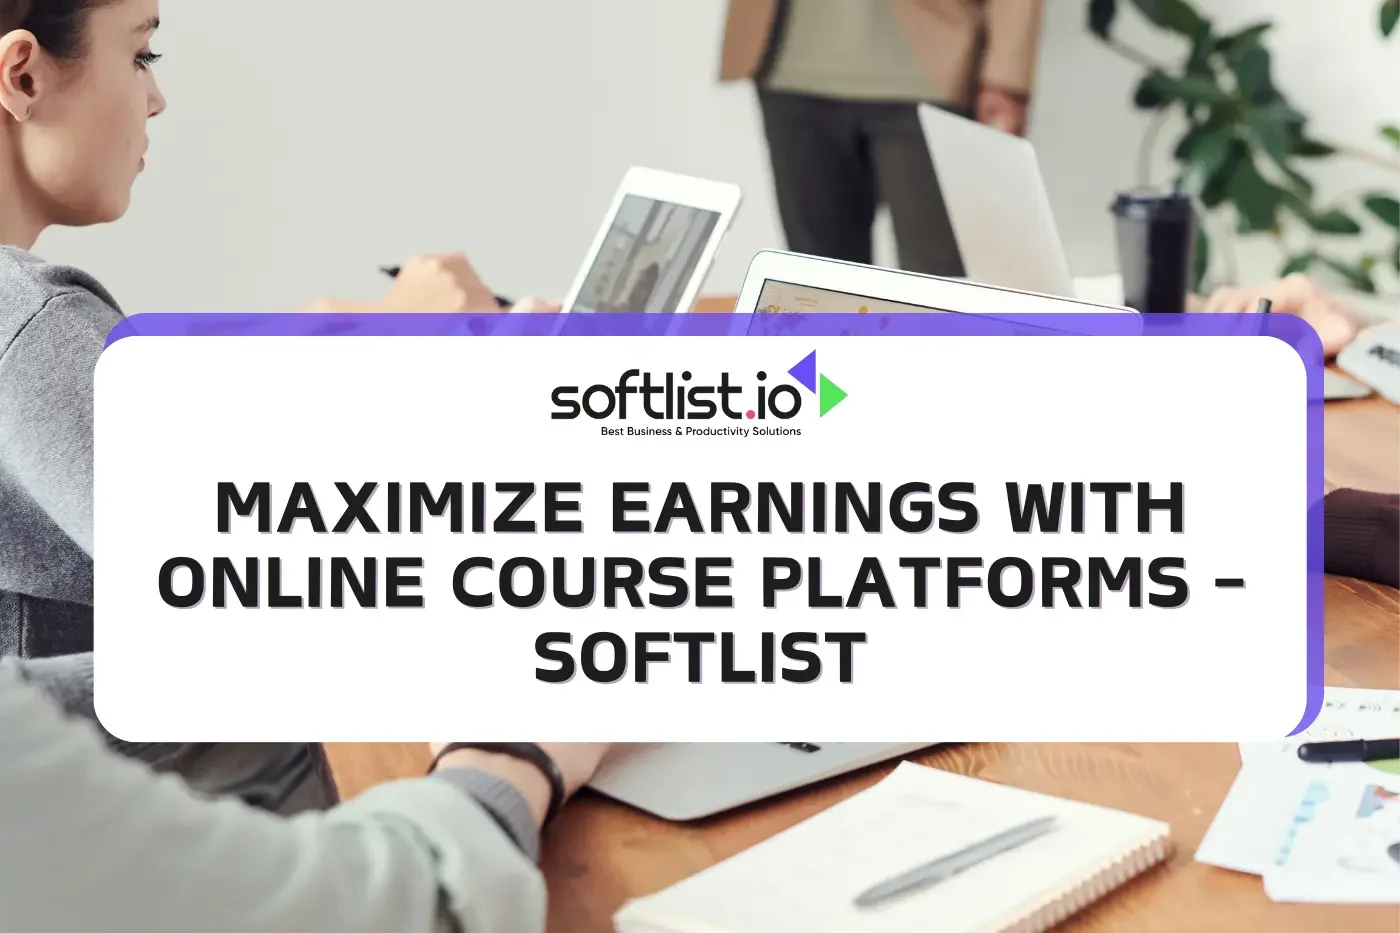 The Ultimate Guide to the Best Online Course Platforms